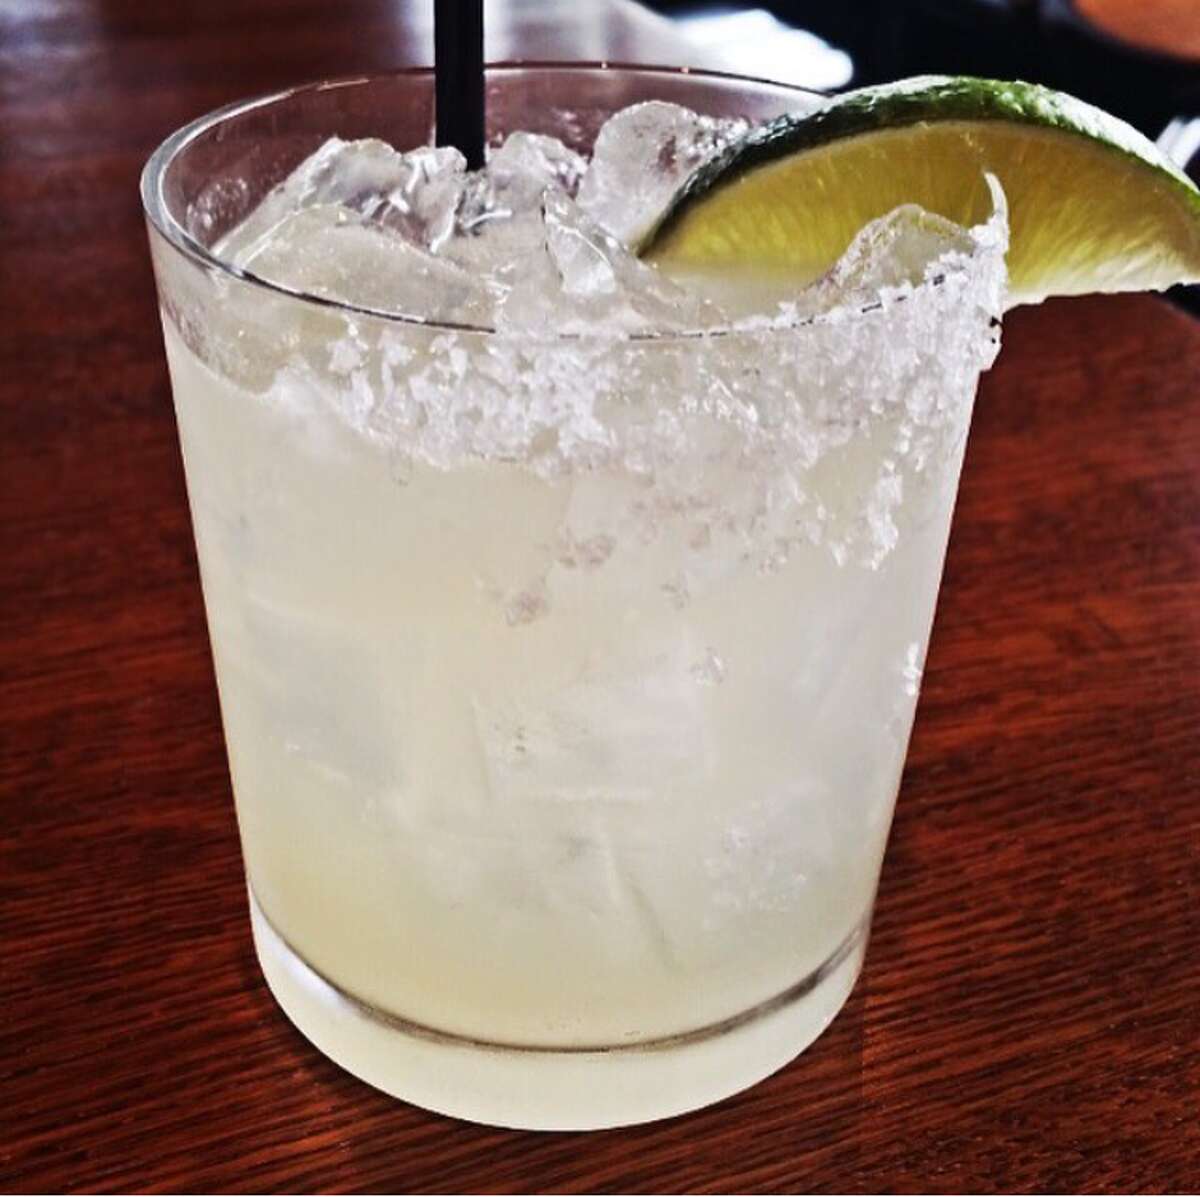 Margarita Crawl at the Pearl: Start with a La Babia margarita at Sternewirth at Hotel Emma. Then wander over to Boiler House and try their margarita (pictured) complete with local honey and orange bitters. End with a citrusy Margarita Gose beer at Southerleigh.